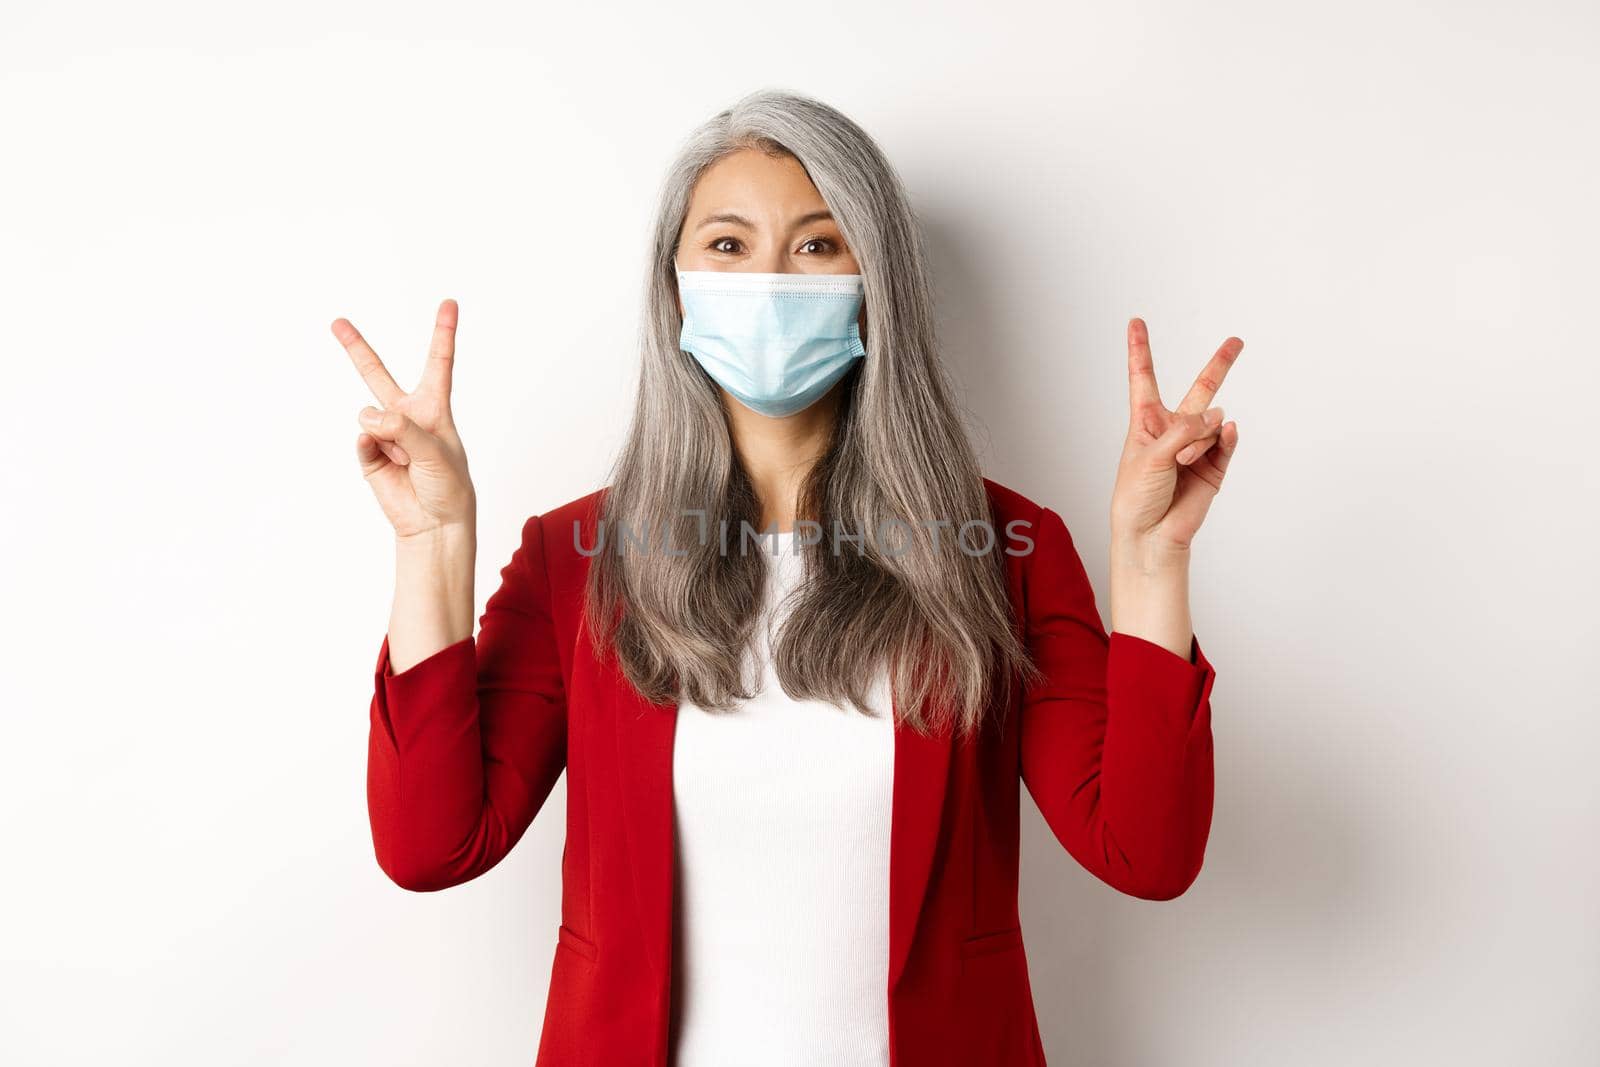 Coronavirus and business concept. Cheerful senior woman in face mask, showing victory or peace sign and smiling with eyes, white background.